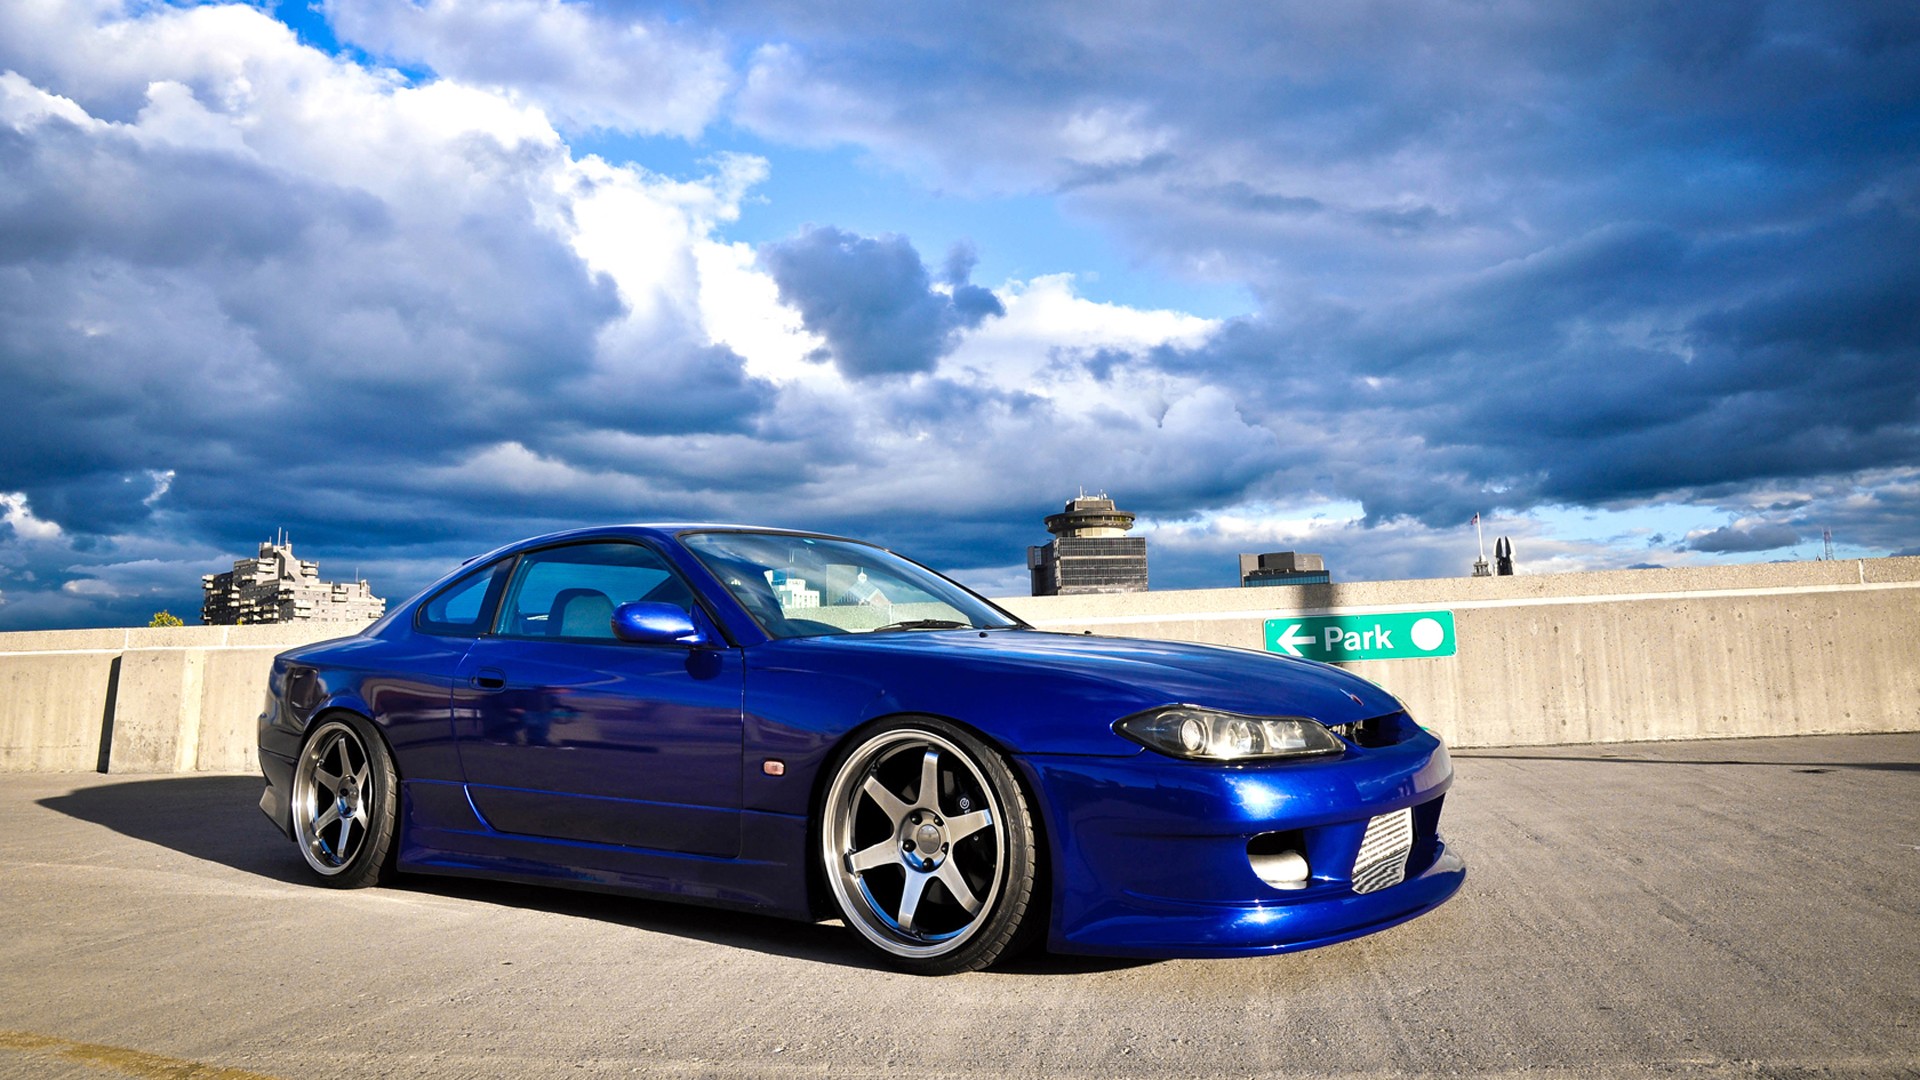 Cars Nissan Silvia S15 Wallpapers Hd Desktop And Mobile Backgrounds